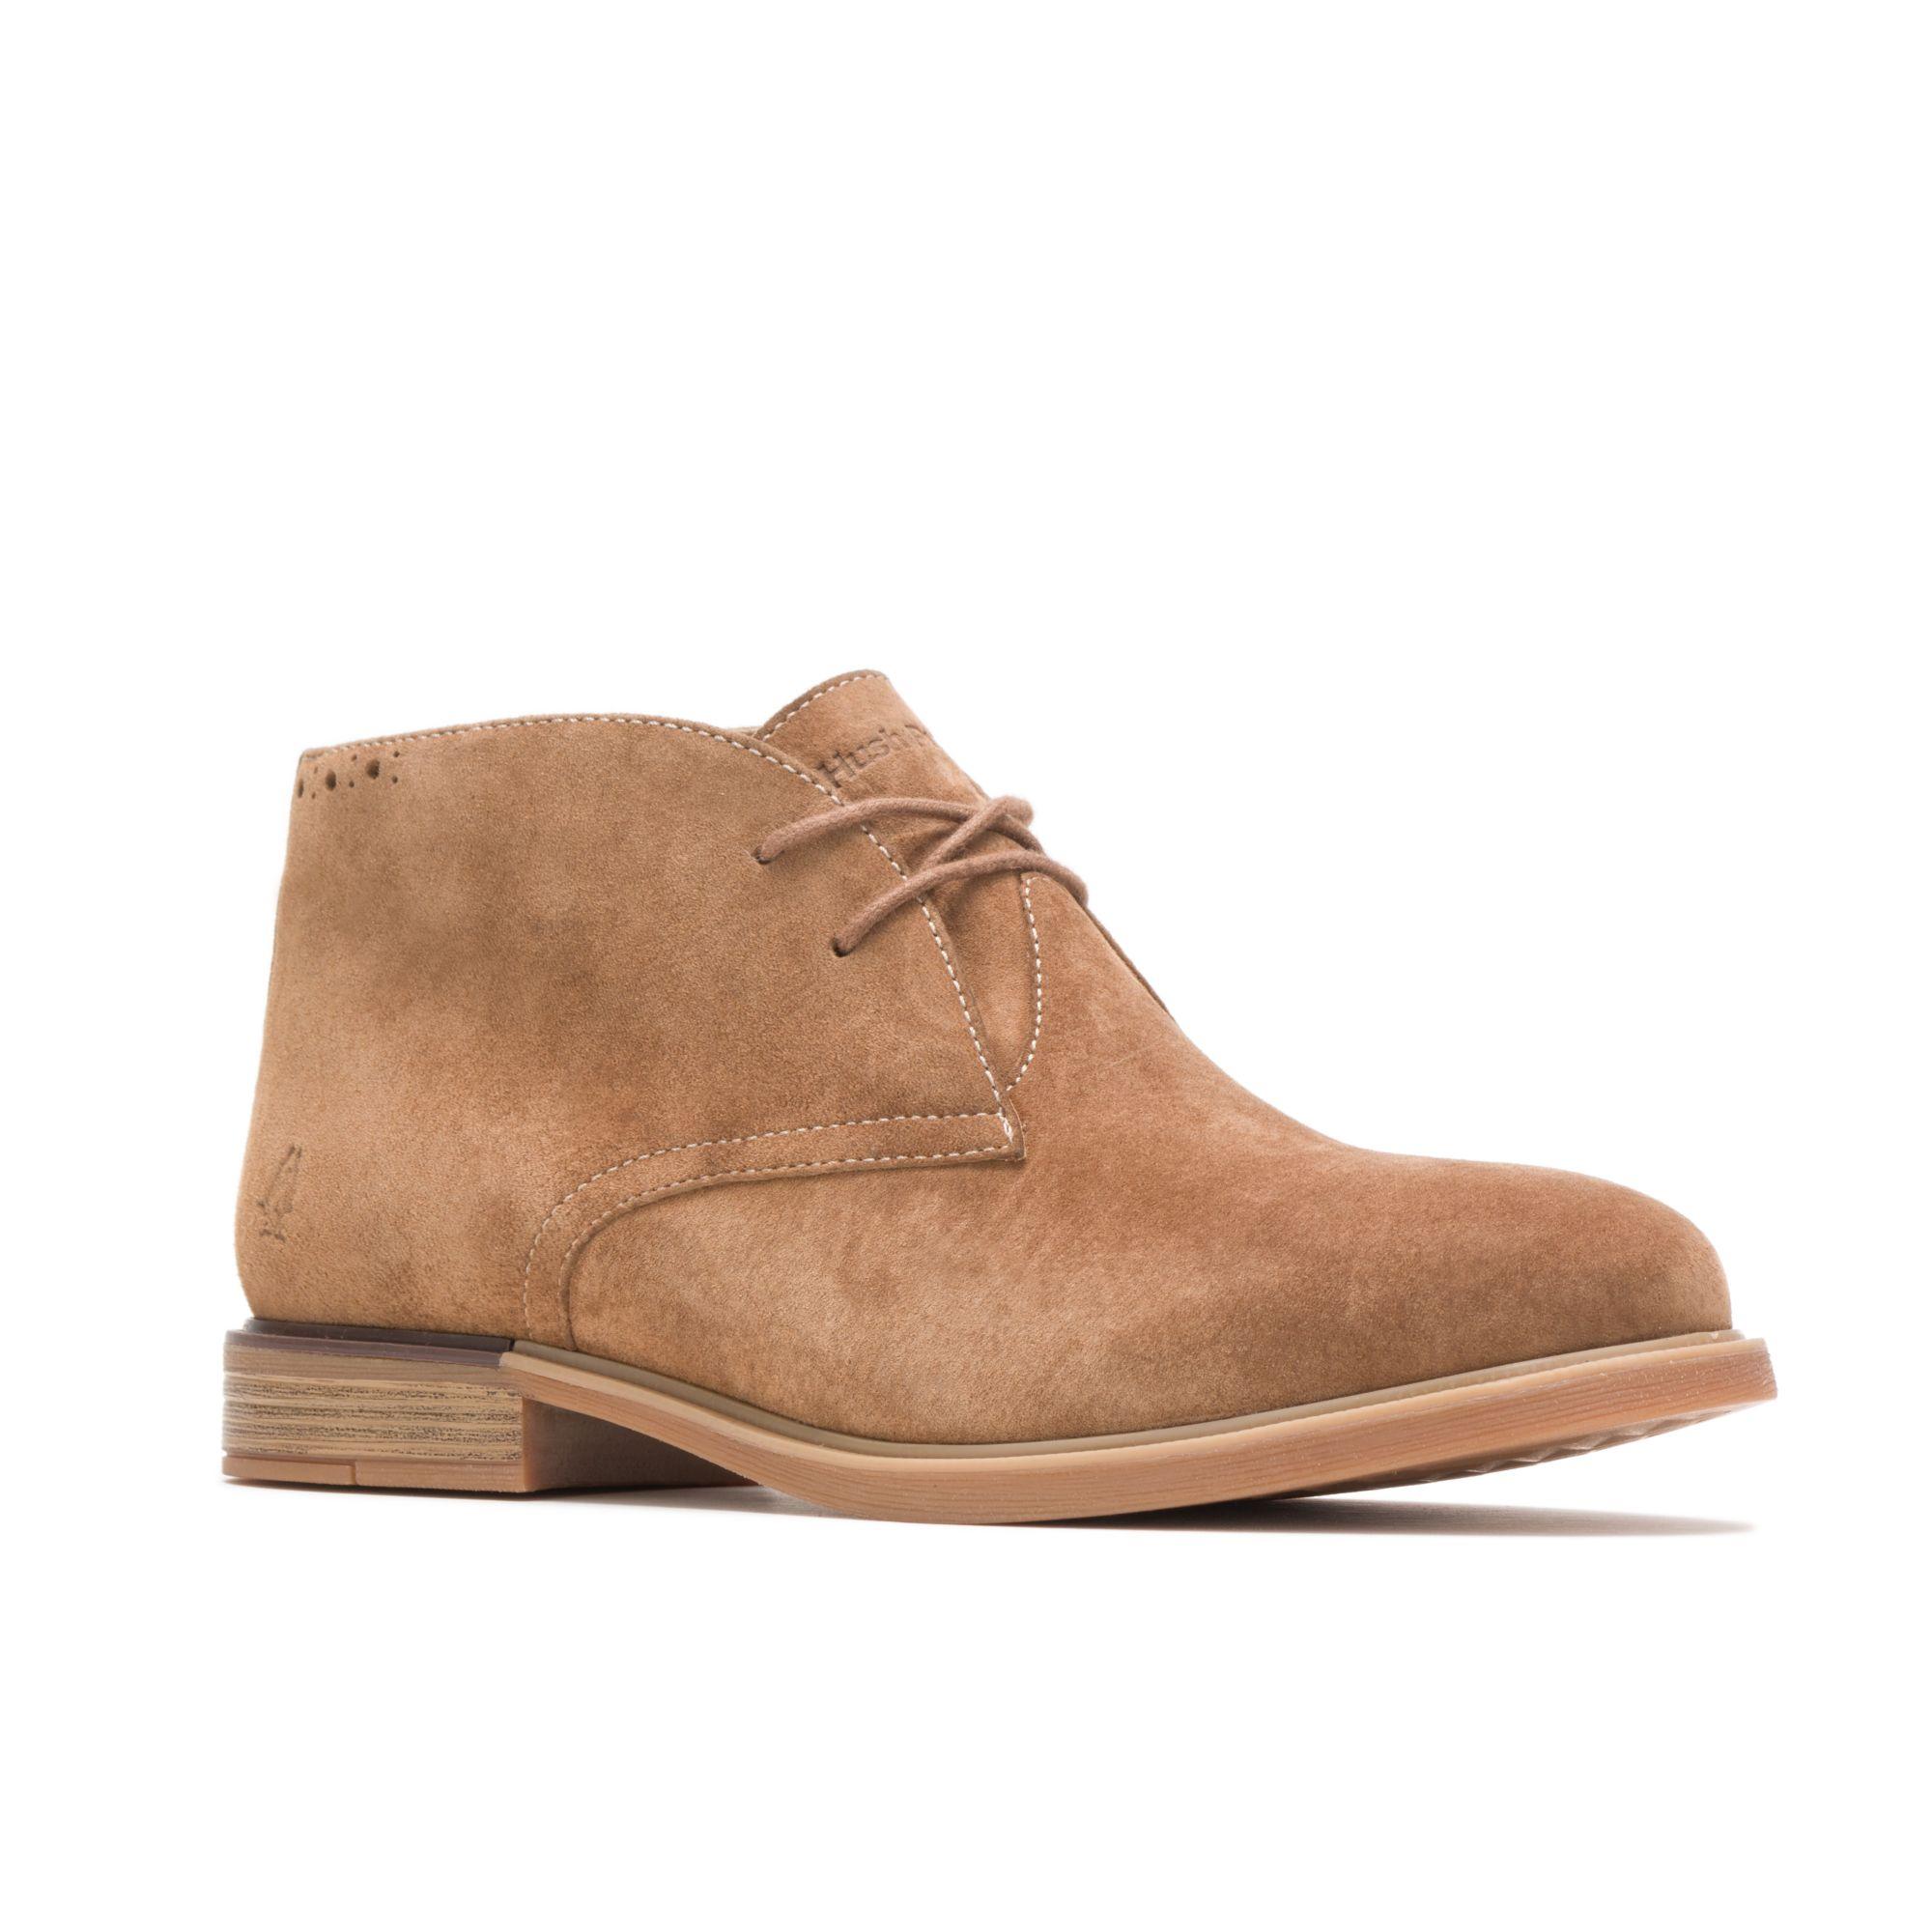 Hush Puppies Leather Bailey Chukka Boot Boots in Chestnut Suede (Brown ...